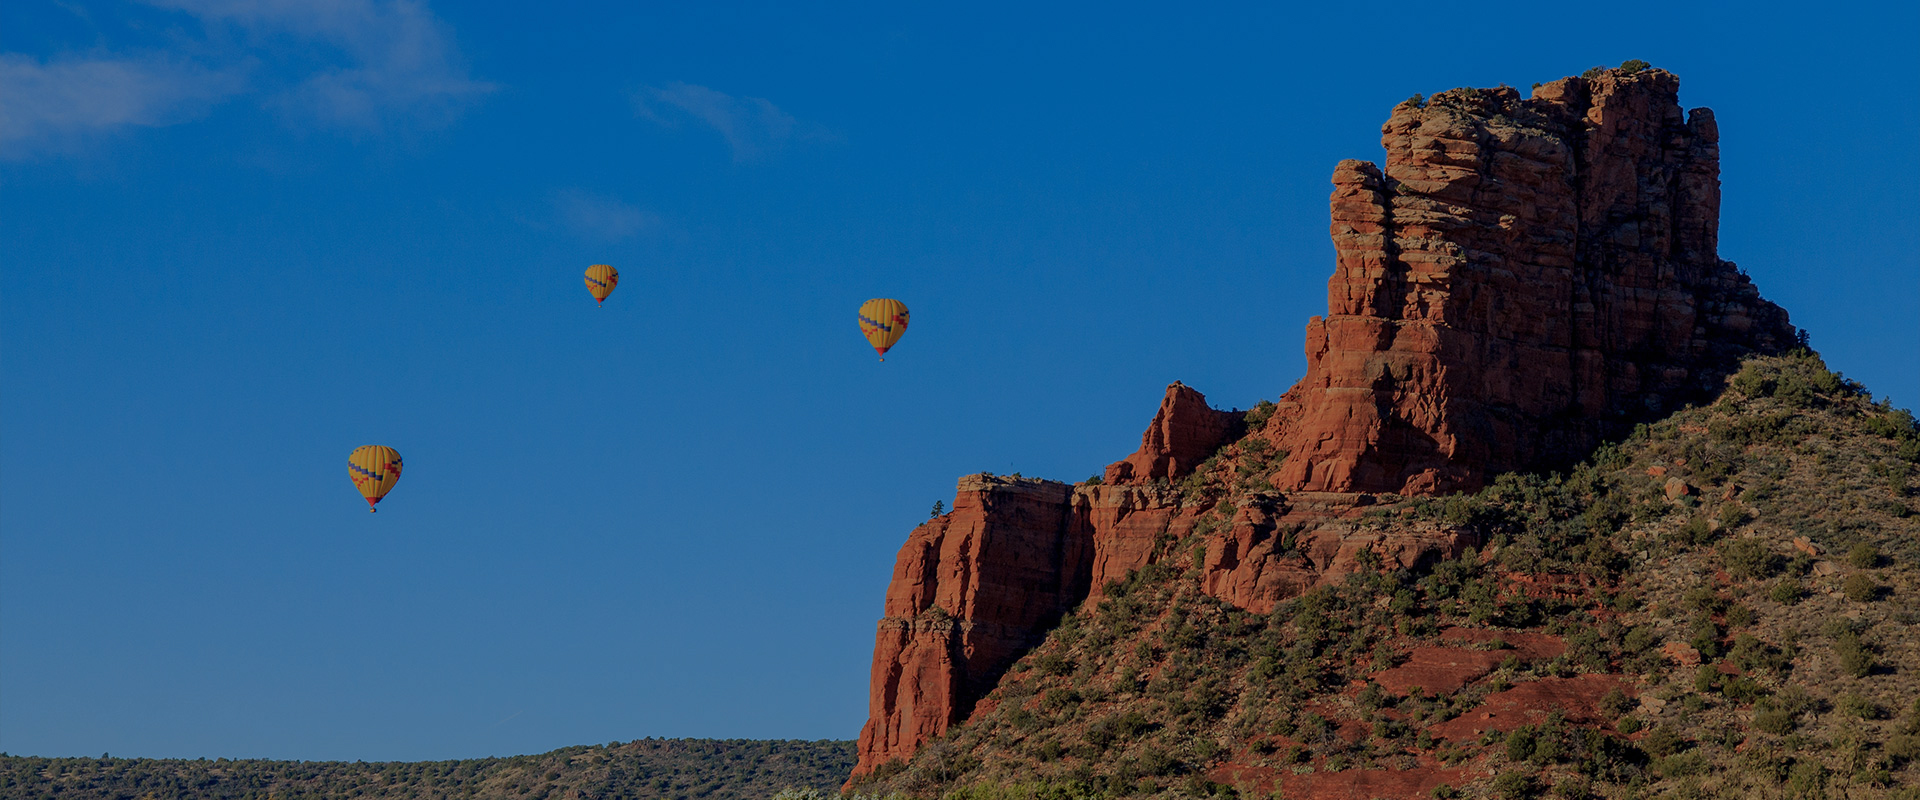 yellow hot air balloons floating near large rock formation